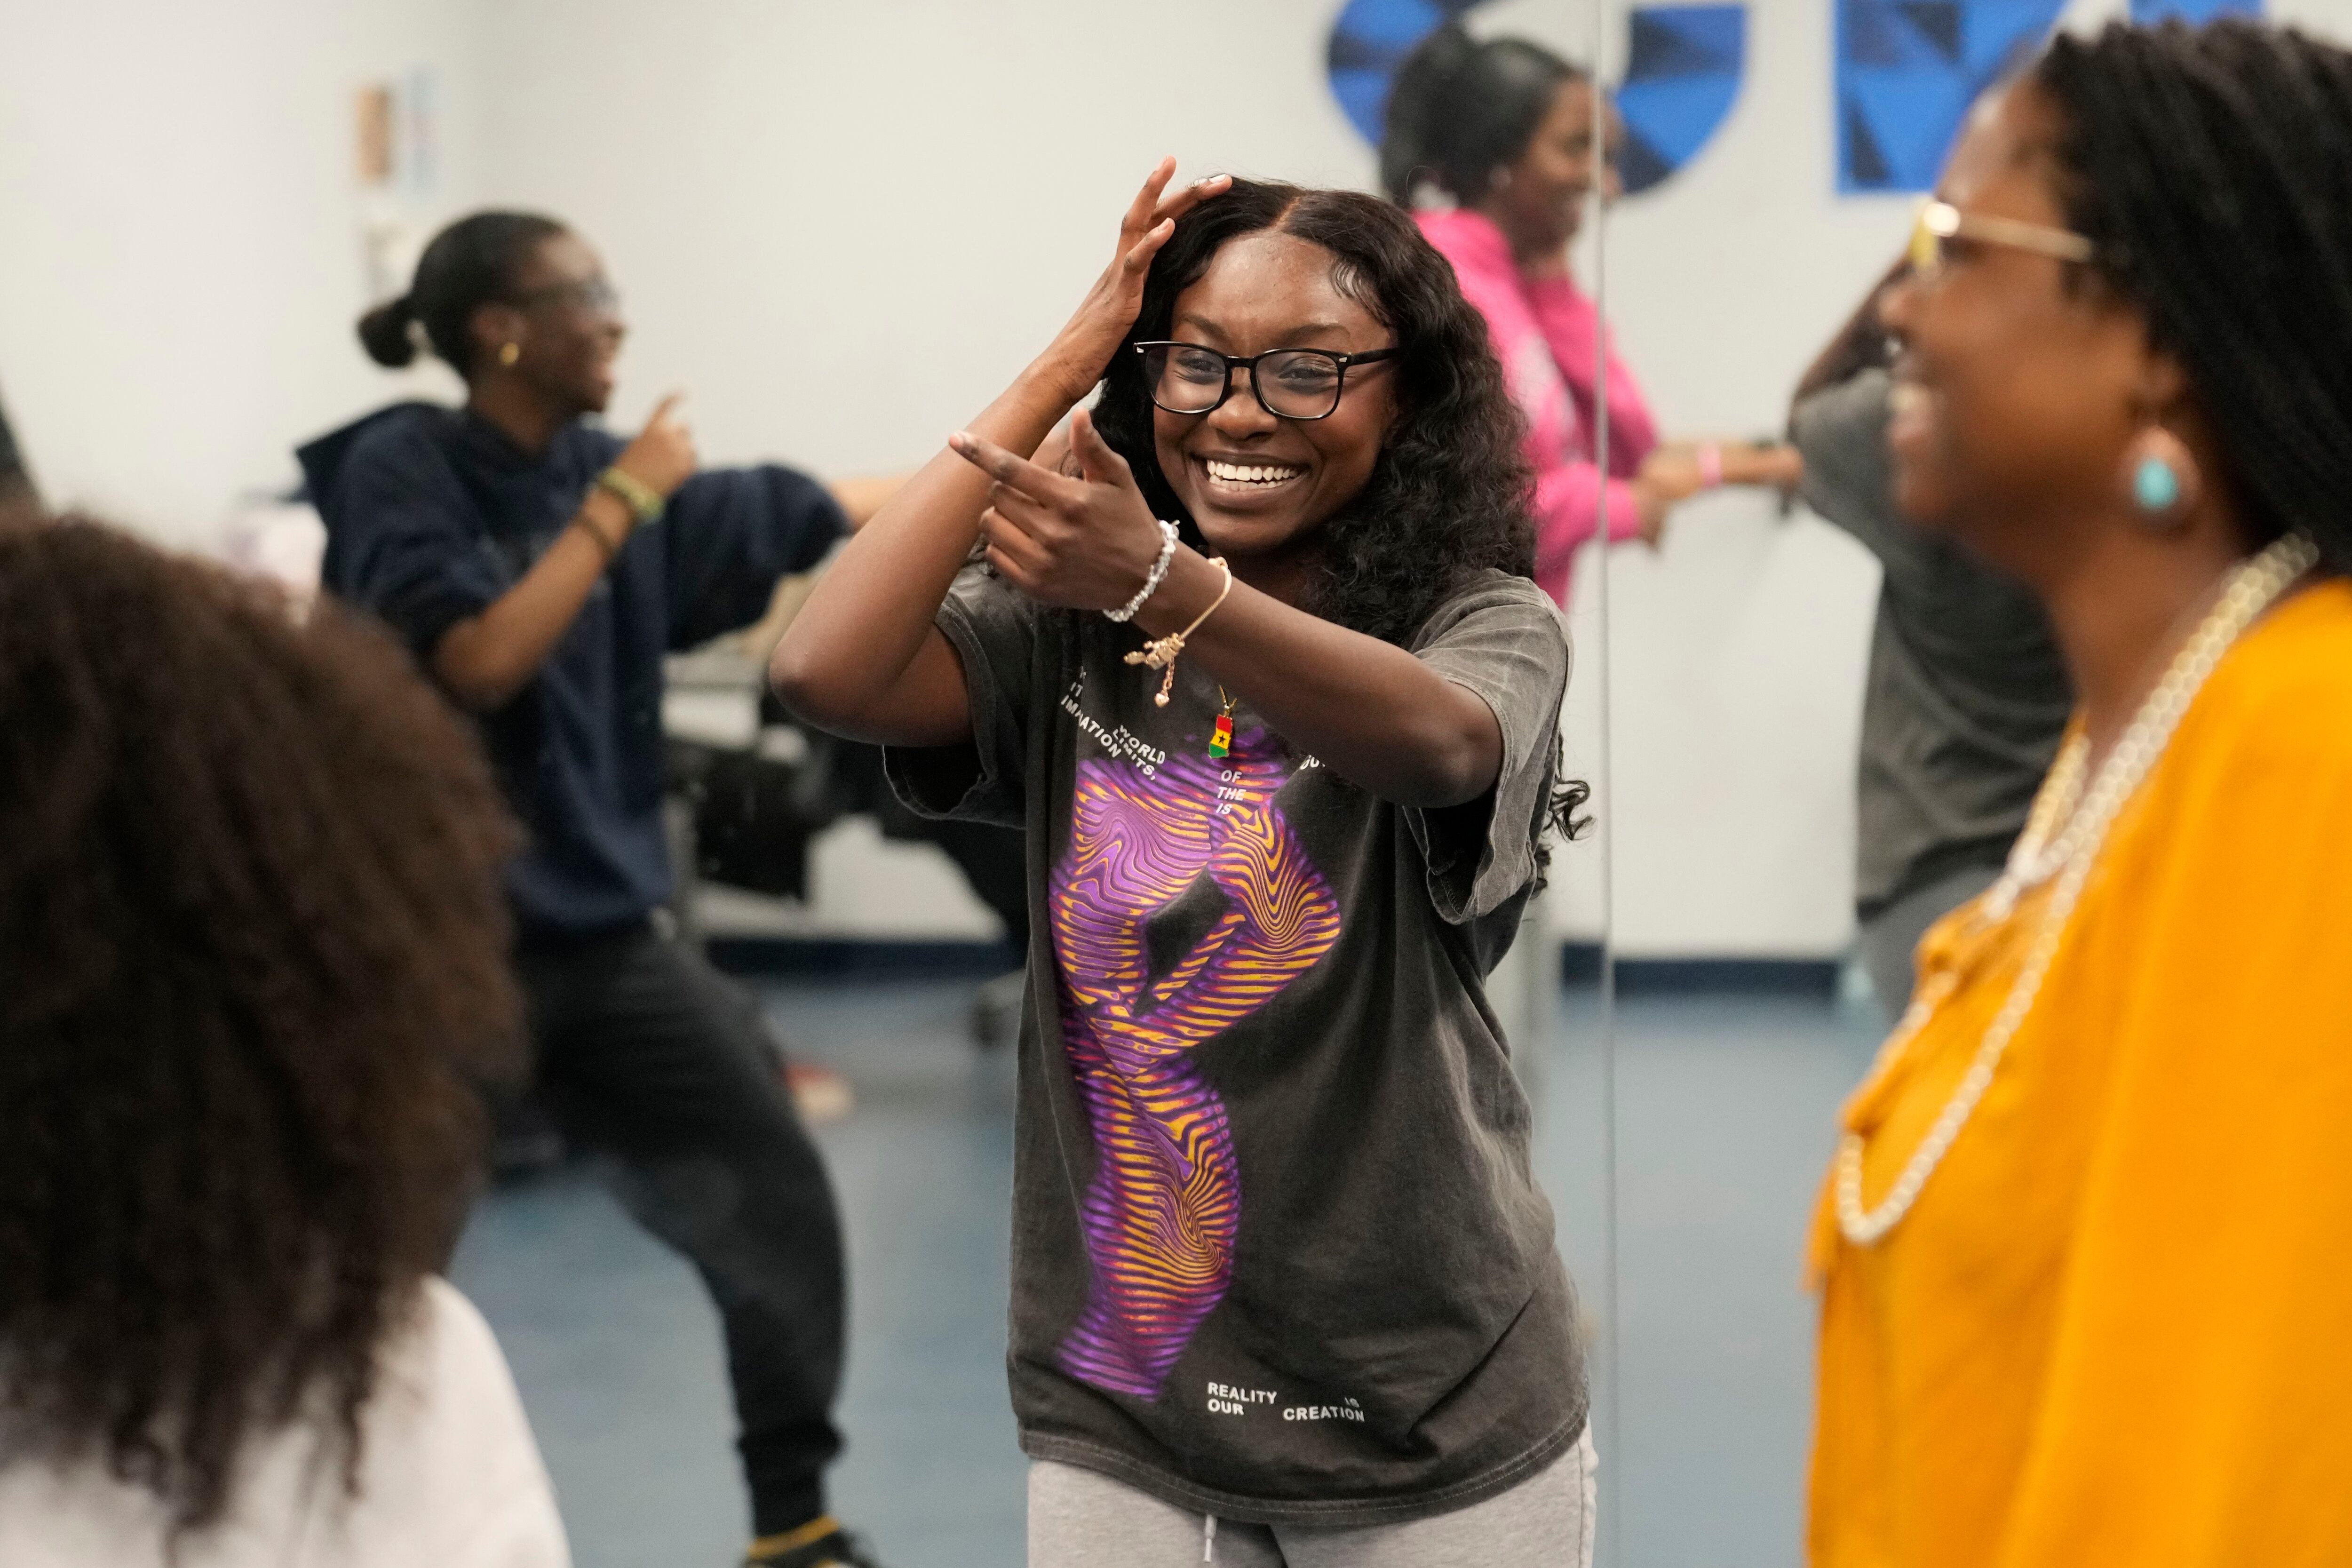 Hillary Amofa, laughs as she participates in a team building game with members of the Lincoln Park High School step team after school Friday, March 8, 2024, in Chicago. When she started writing her college essay, Amofa told the story she thought admissions offices wanted to hear. She wrote about being the daughter of immigrants from Ghana, about growing up in a small apartment in Chicago. She described hardship and struggle. Then she deleted it all. 